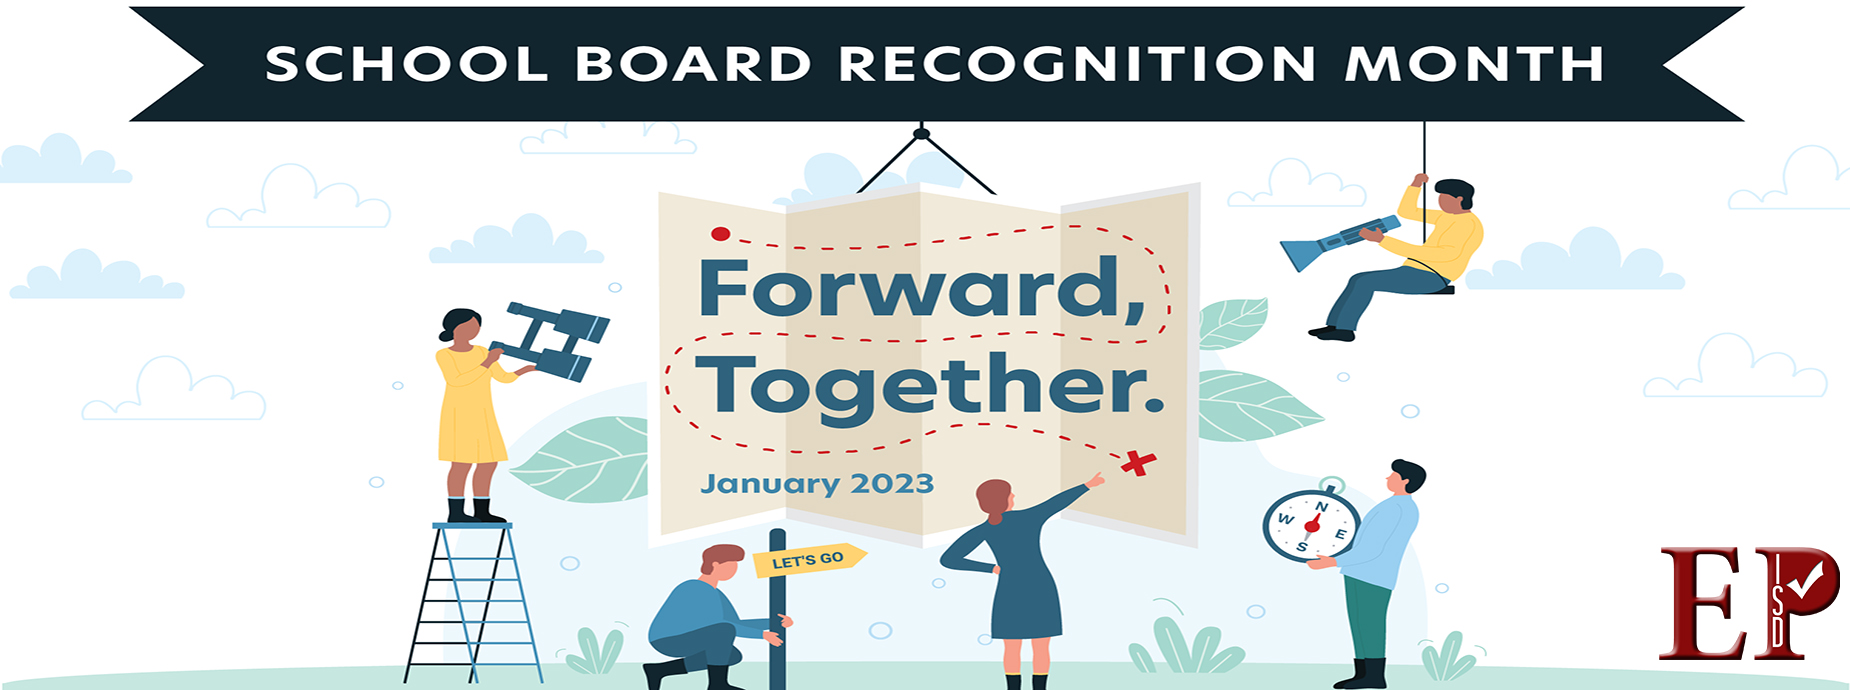 School Board Recognition Month banner